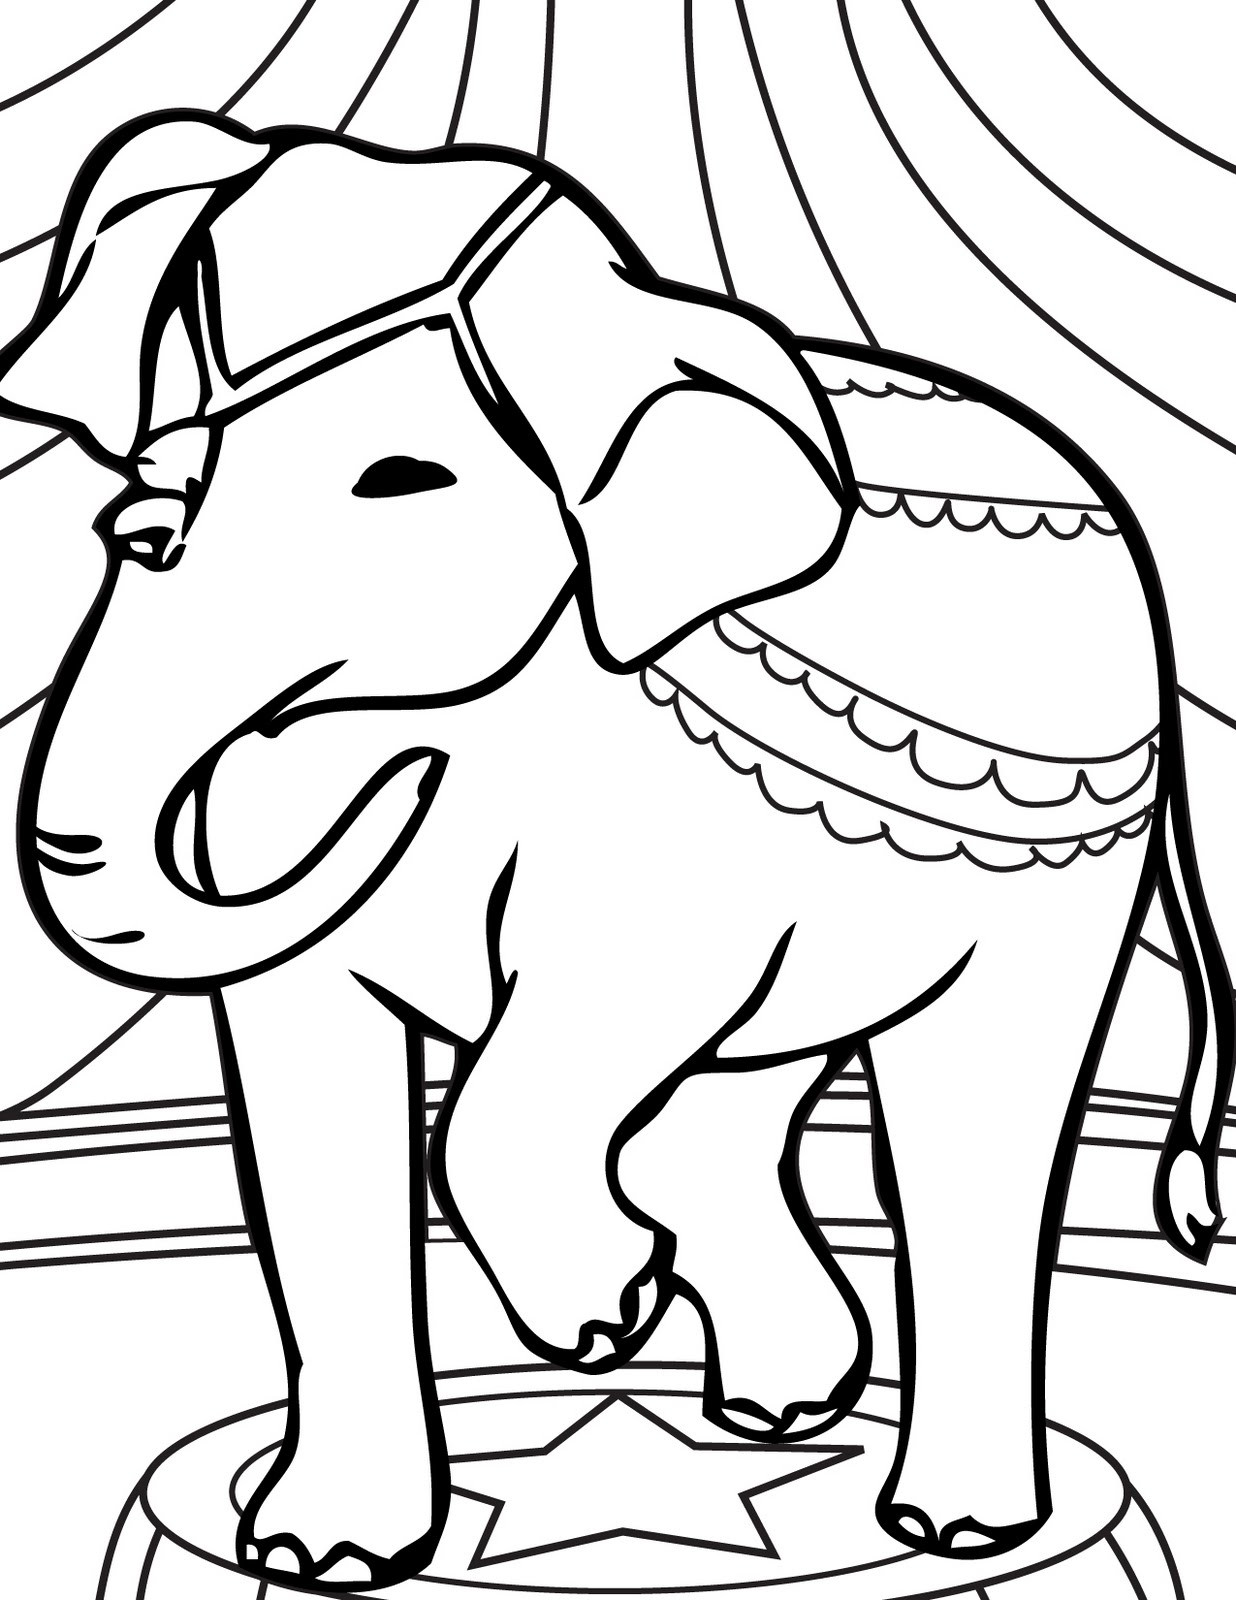 Kids Coloring Book
 transmissionpress Circus Elephant Coloring Pages